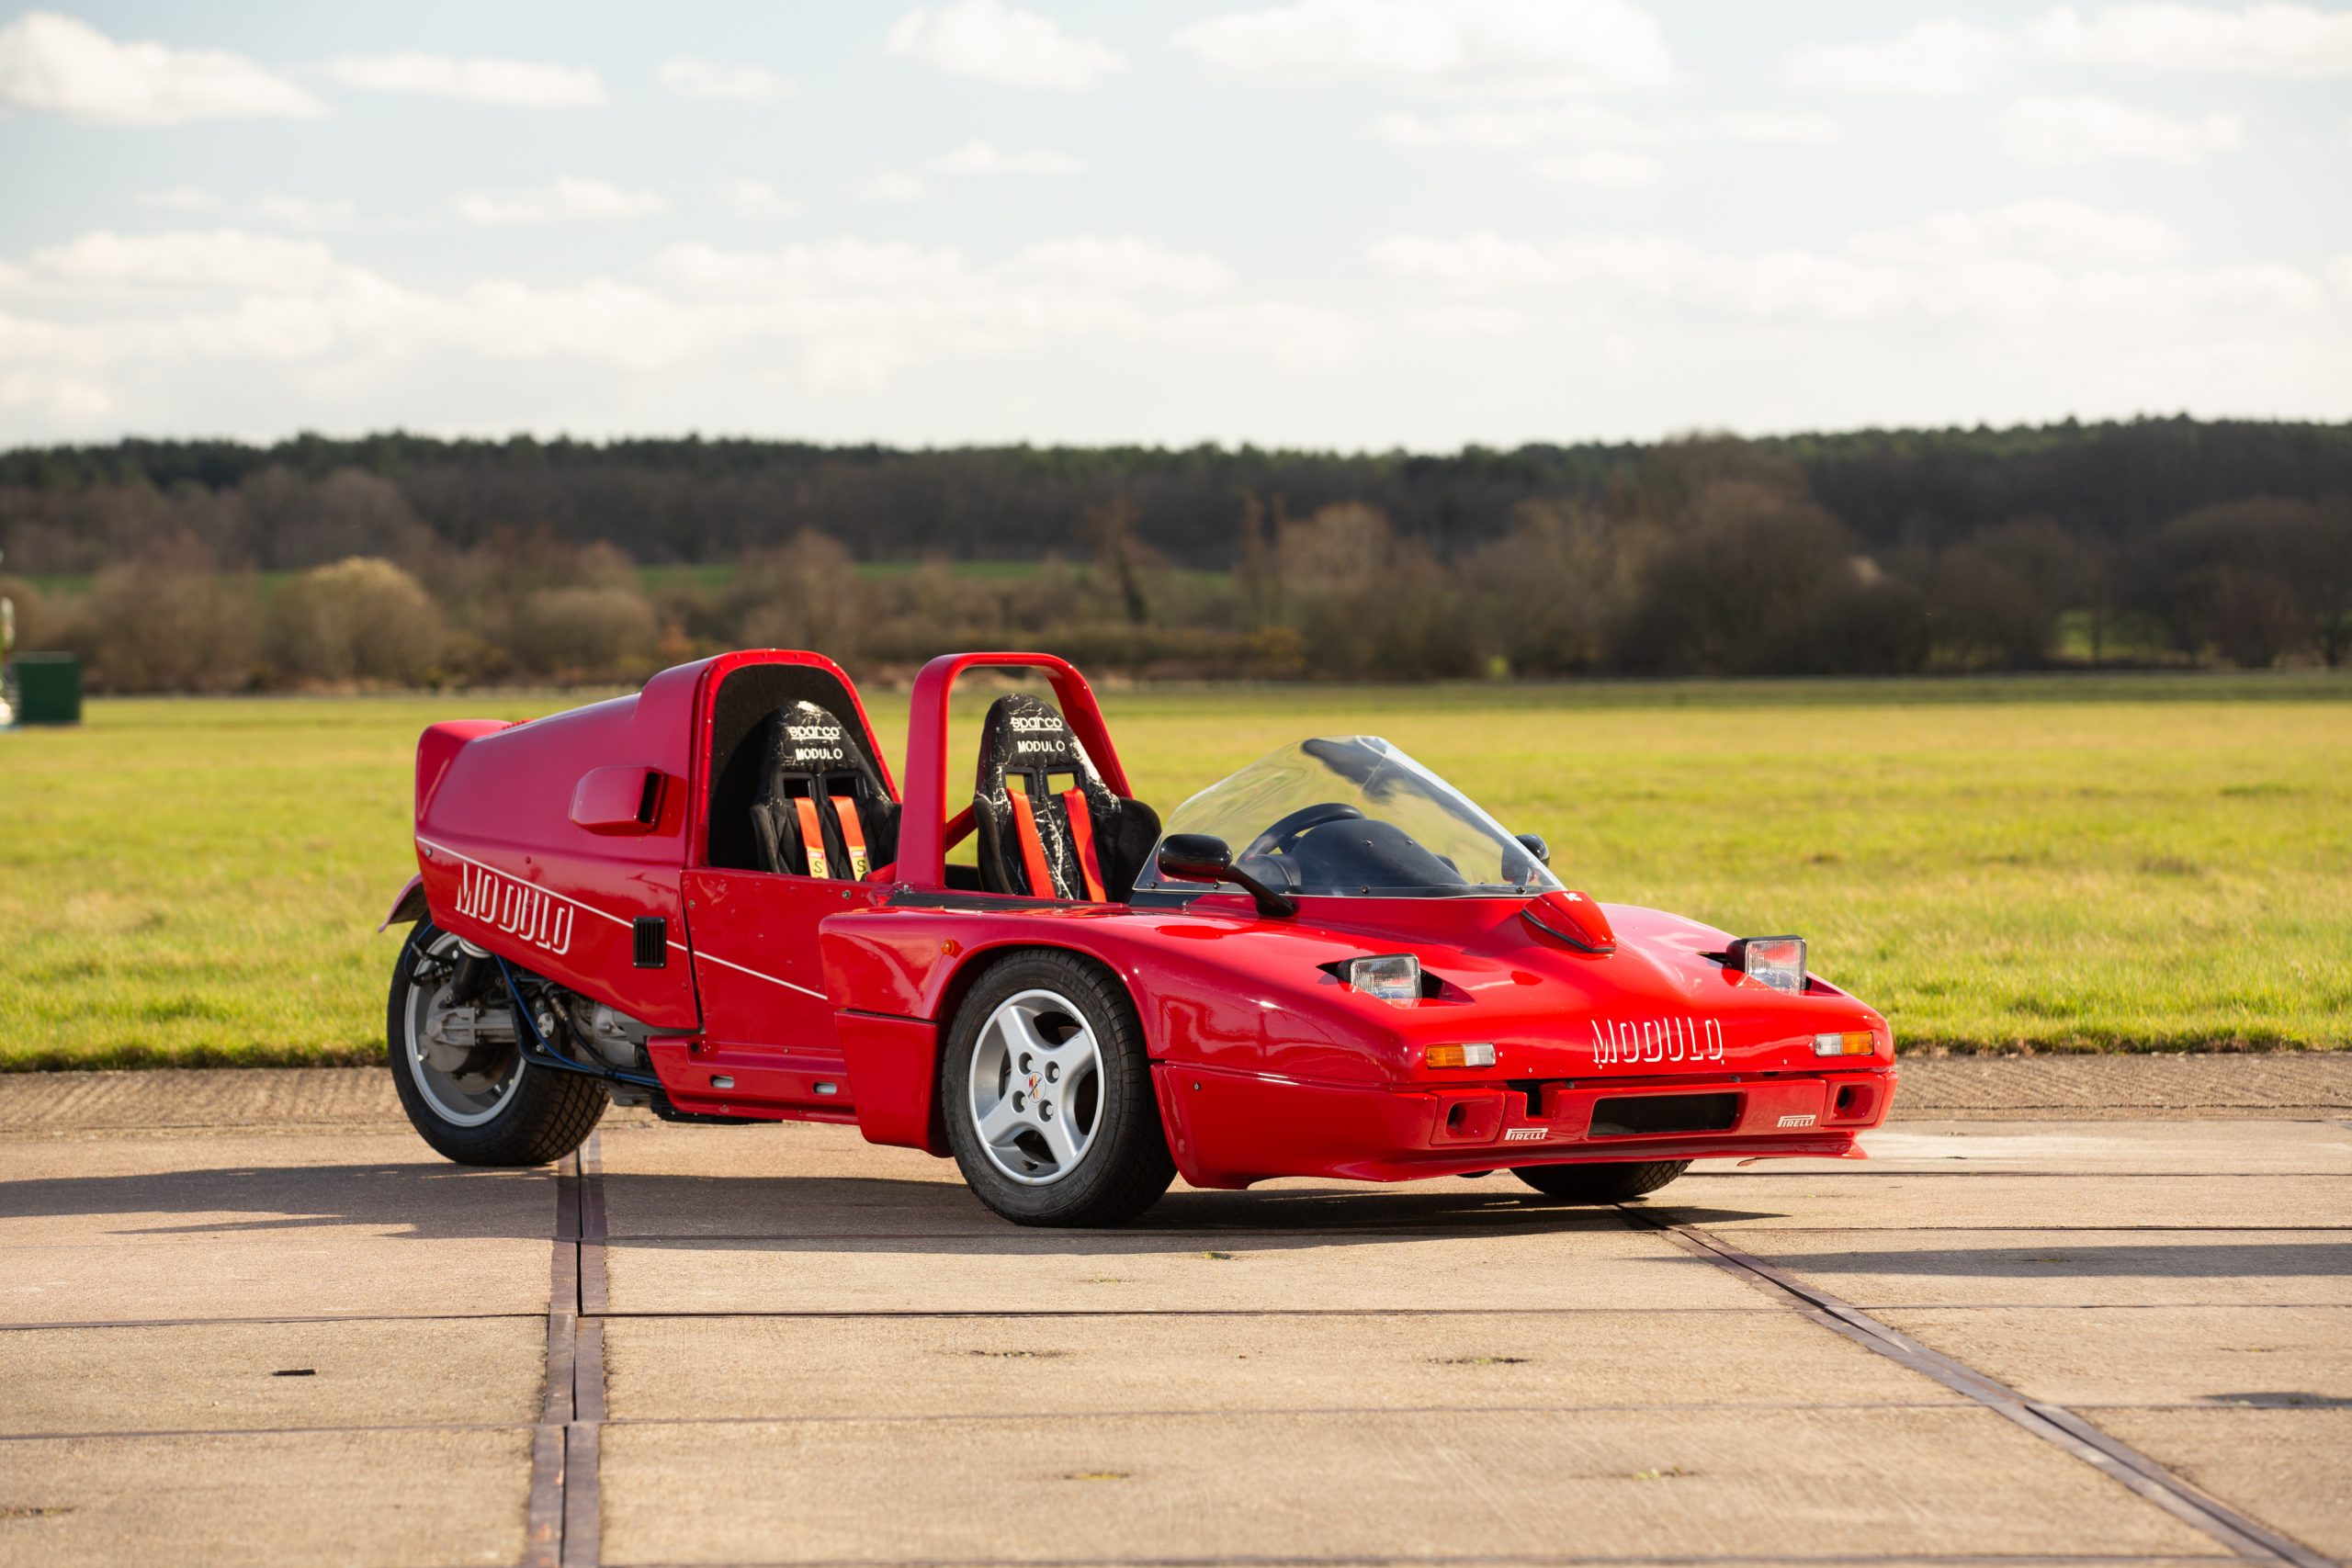 Nigel Mansell is selling one of his prized red racers – but it's not what you imagine